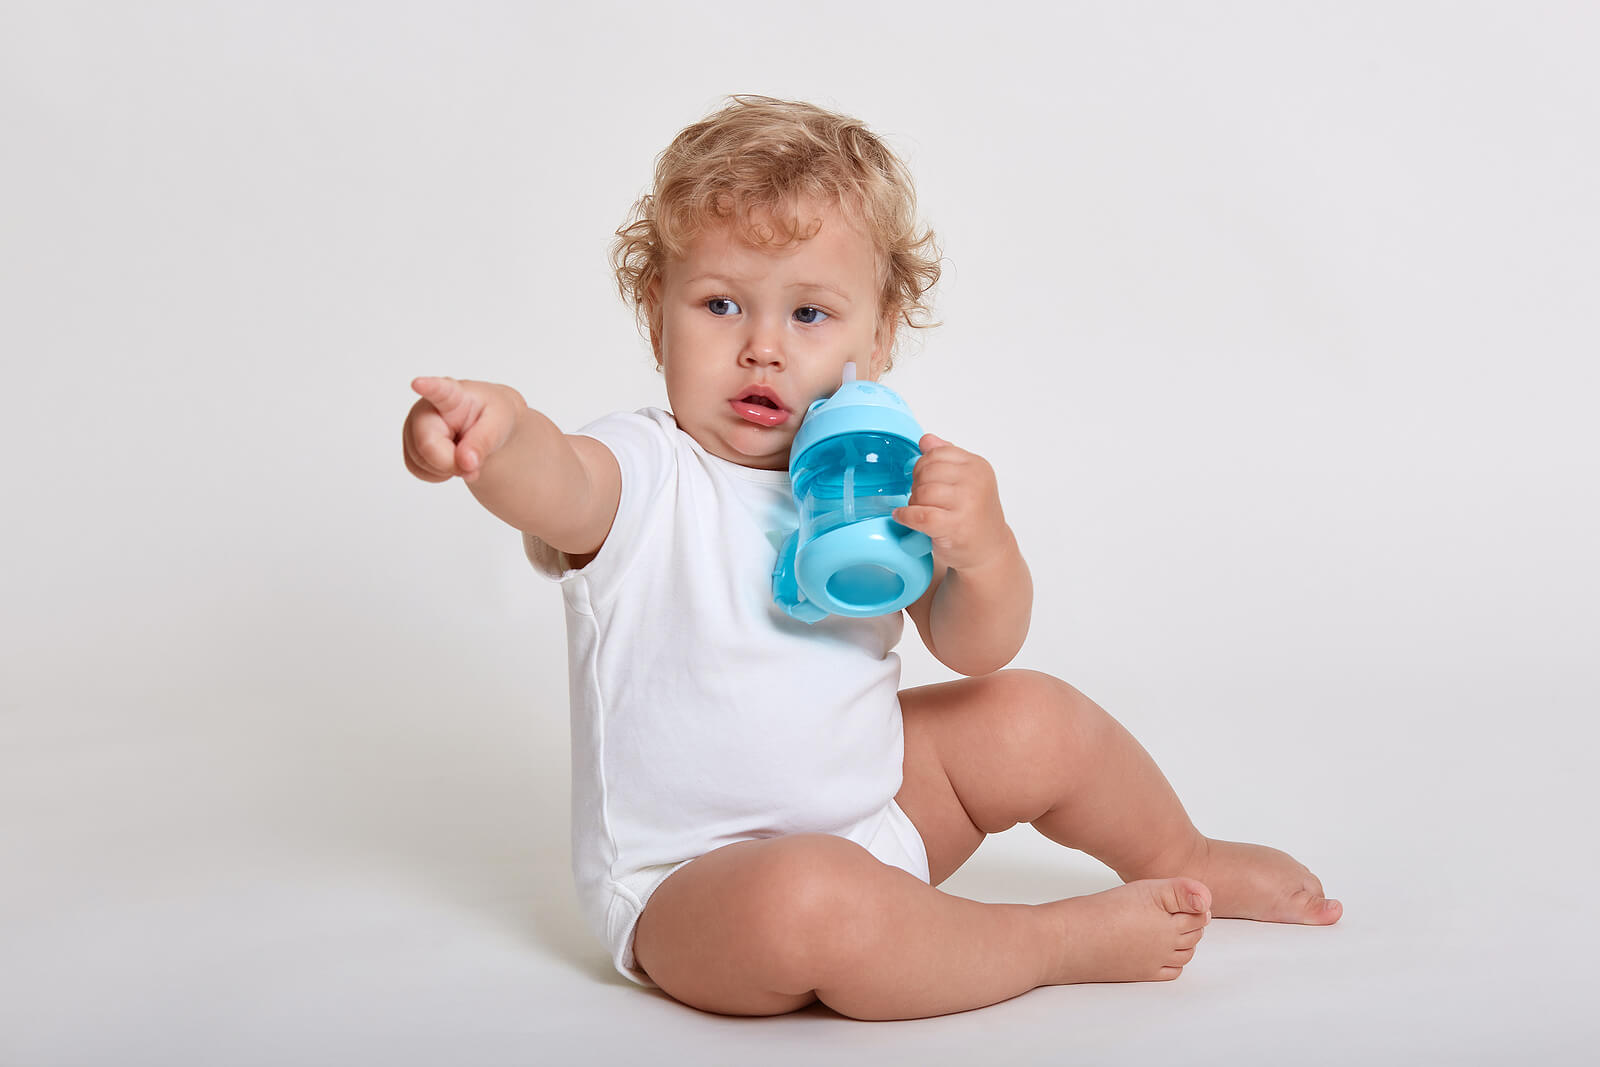 A baby holding a sippy cup and pointing.